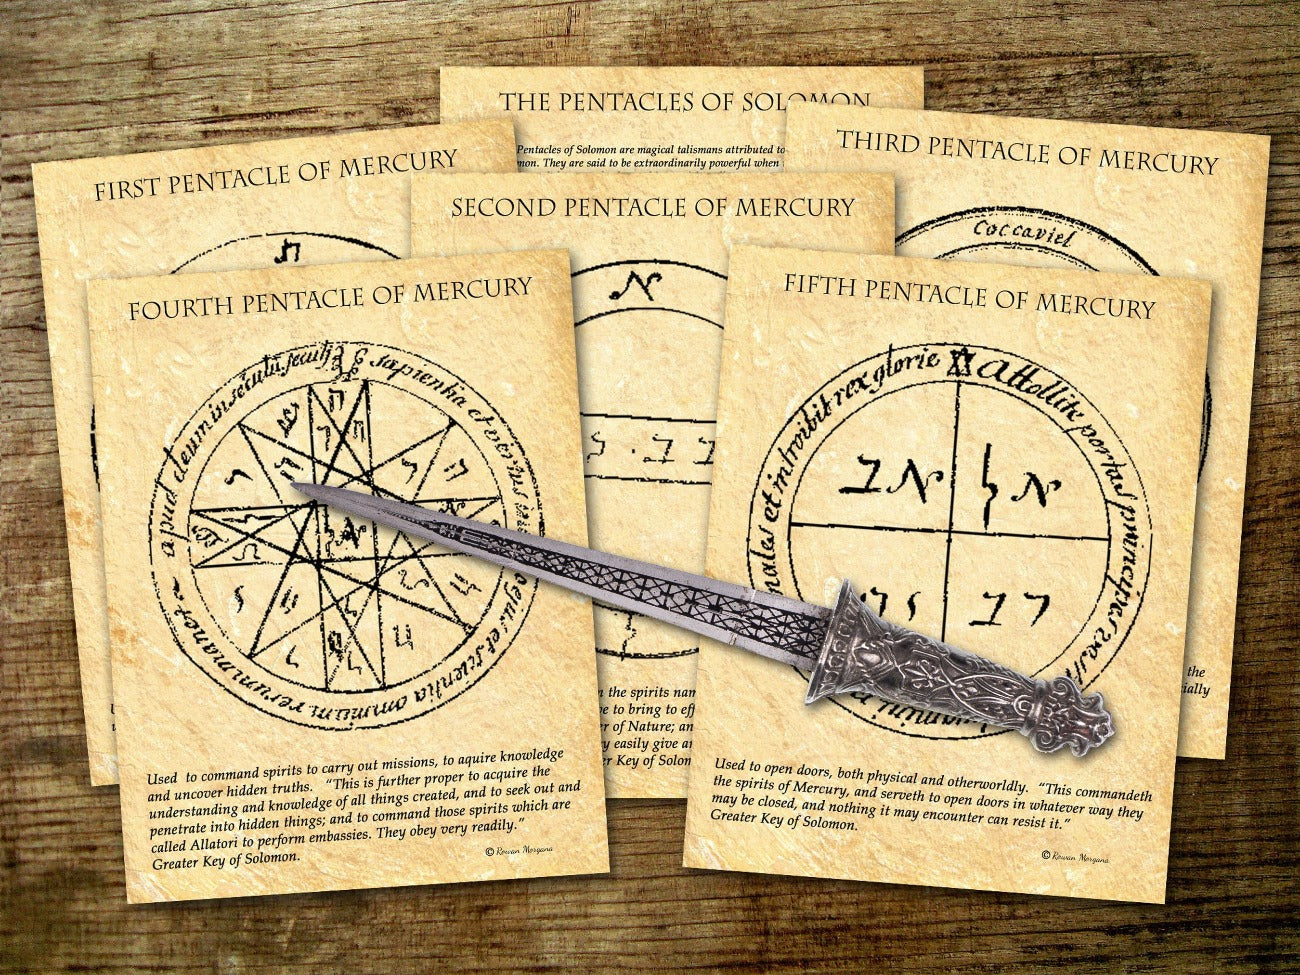 Pentacles of Mercury PENTACLES of SOLOMON BUNDLE 45 Pages, Seven Pentacles of the Key of Solomon, Solomon Seals, Pentagram of Solomon, Star of David Kabbalah - Morgana Magick Spell